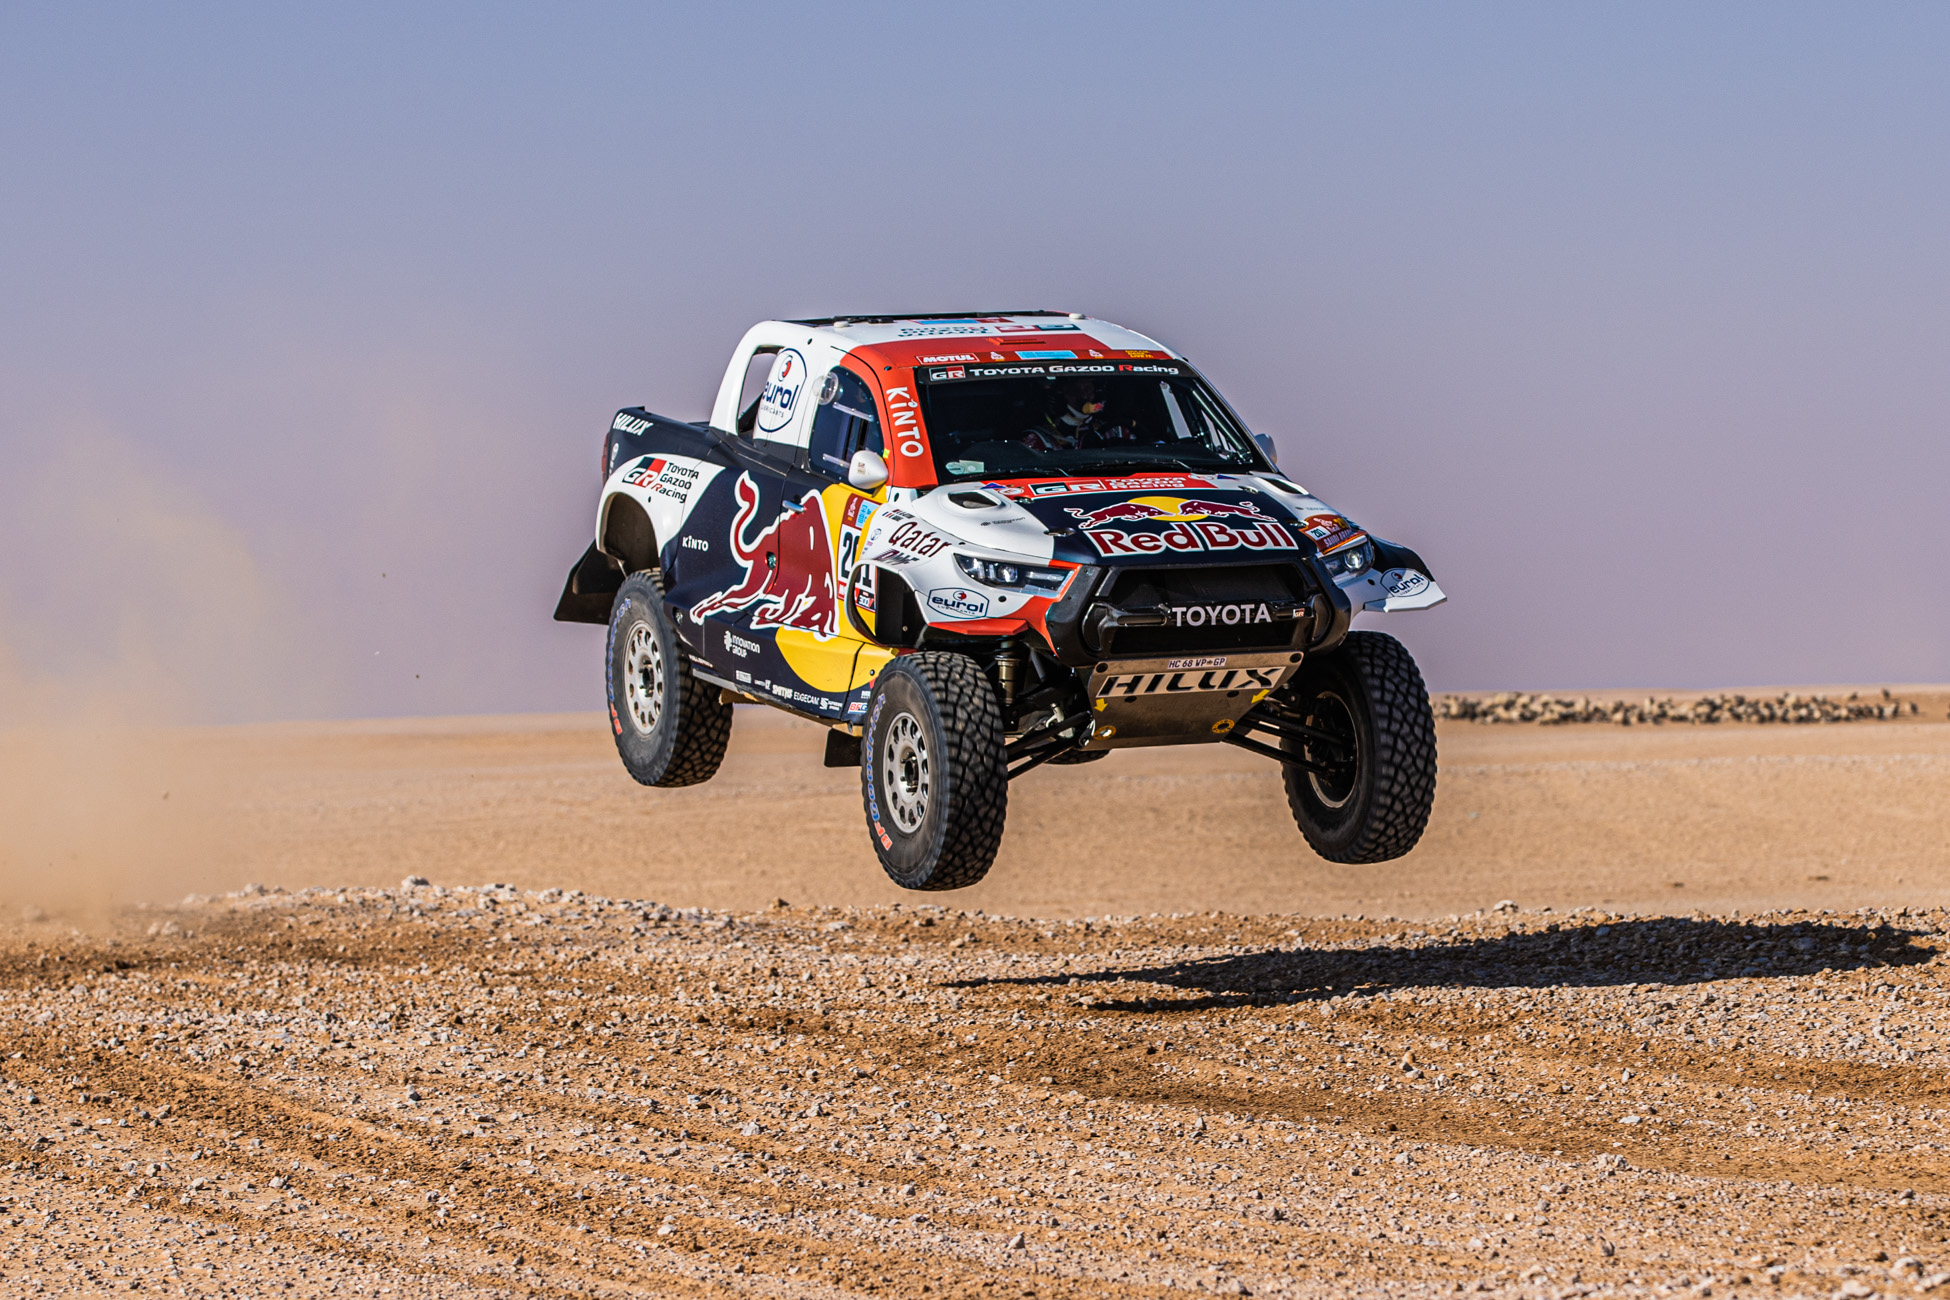 Dakar 2022: Al Attiyah extends his lead after stage 4 win